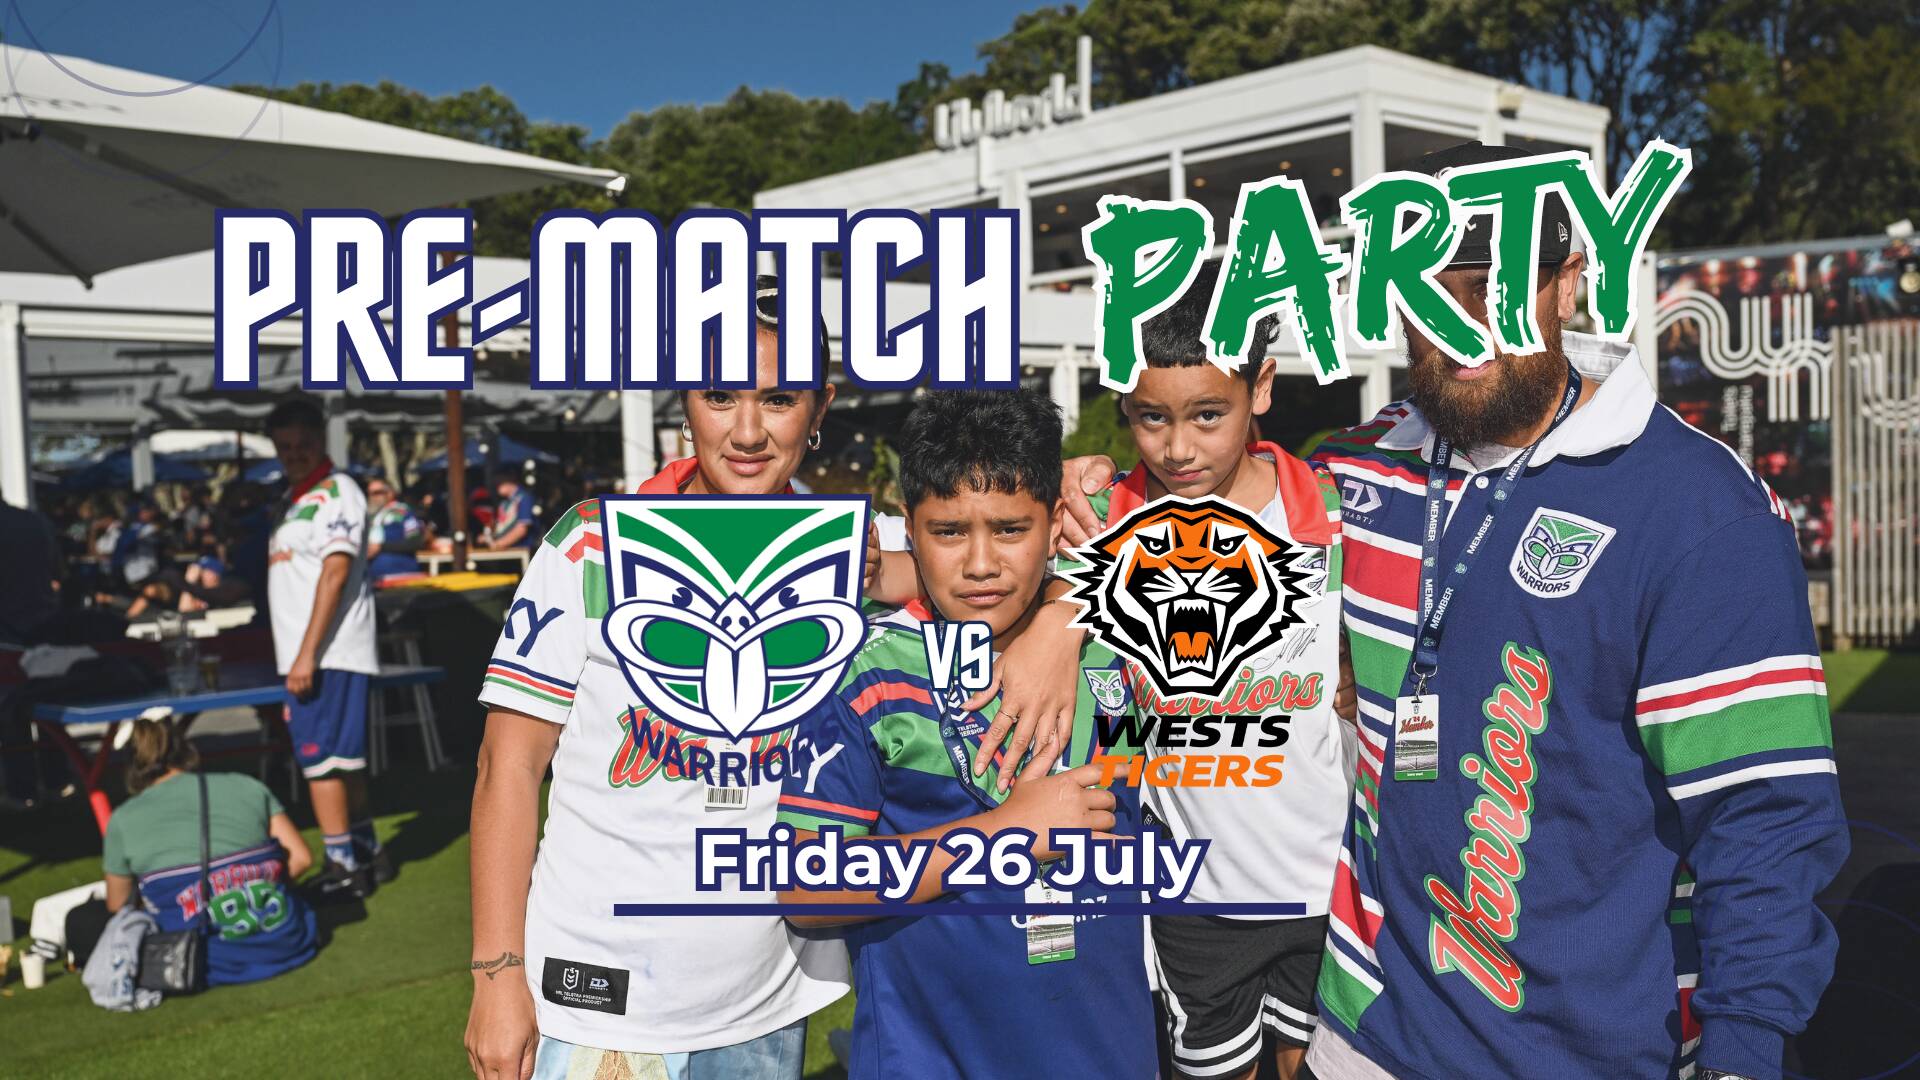 Warriors vs West Tigers Pre-match Party